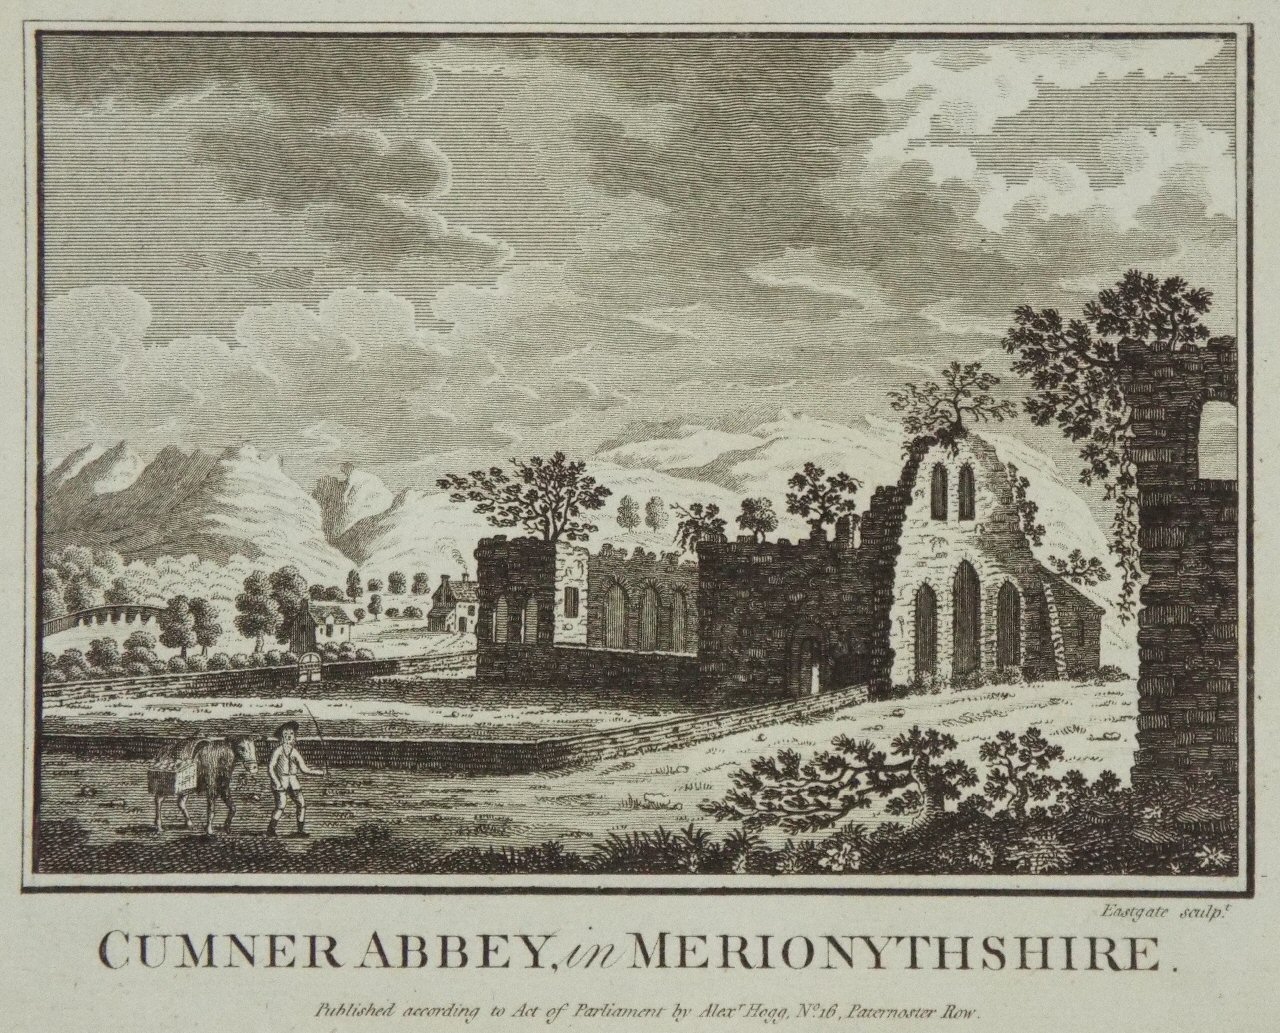 Print - Cumner Abbey, in Merionethshire.